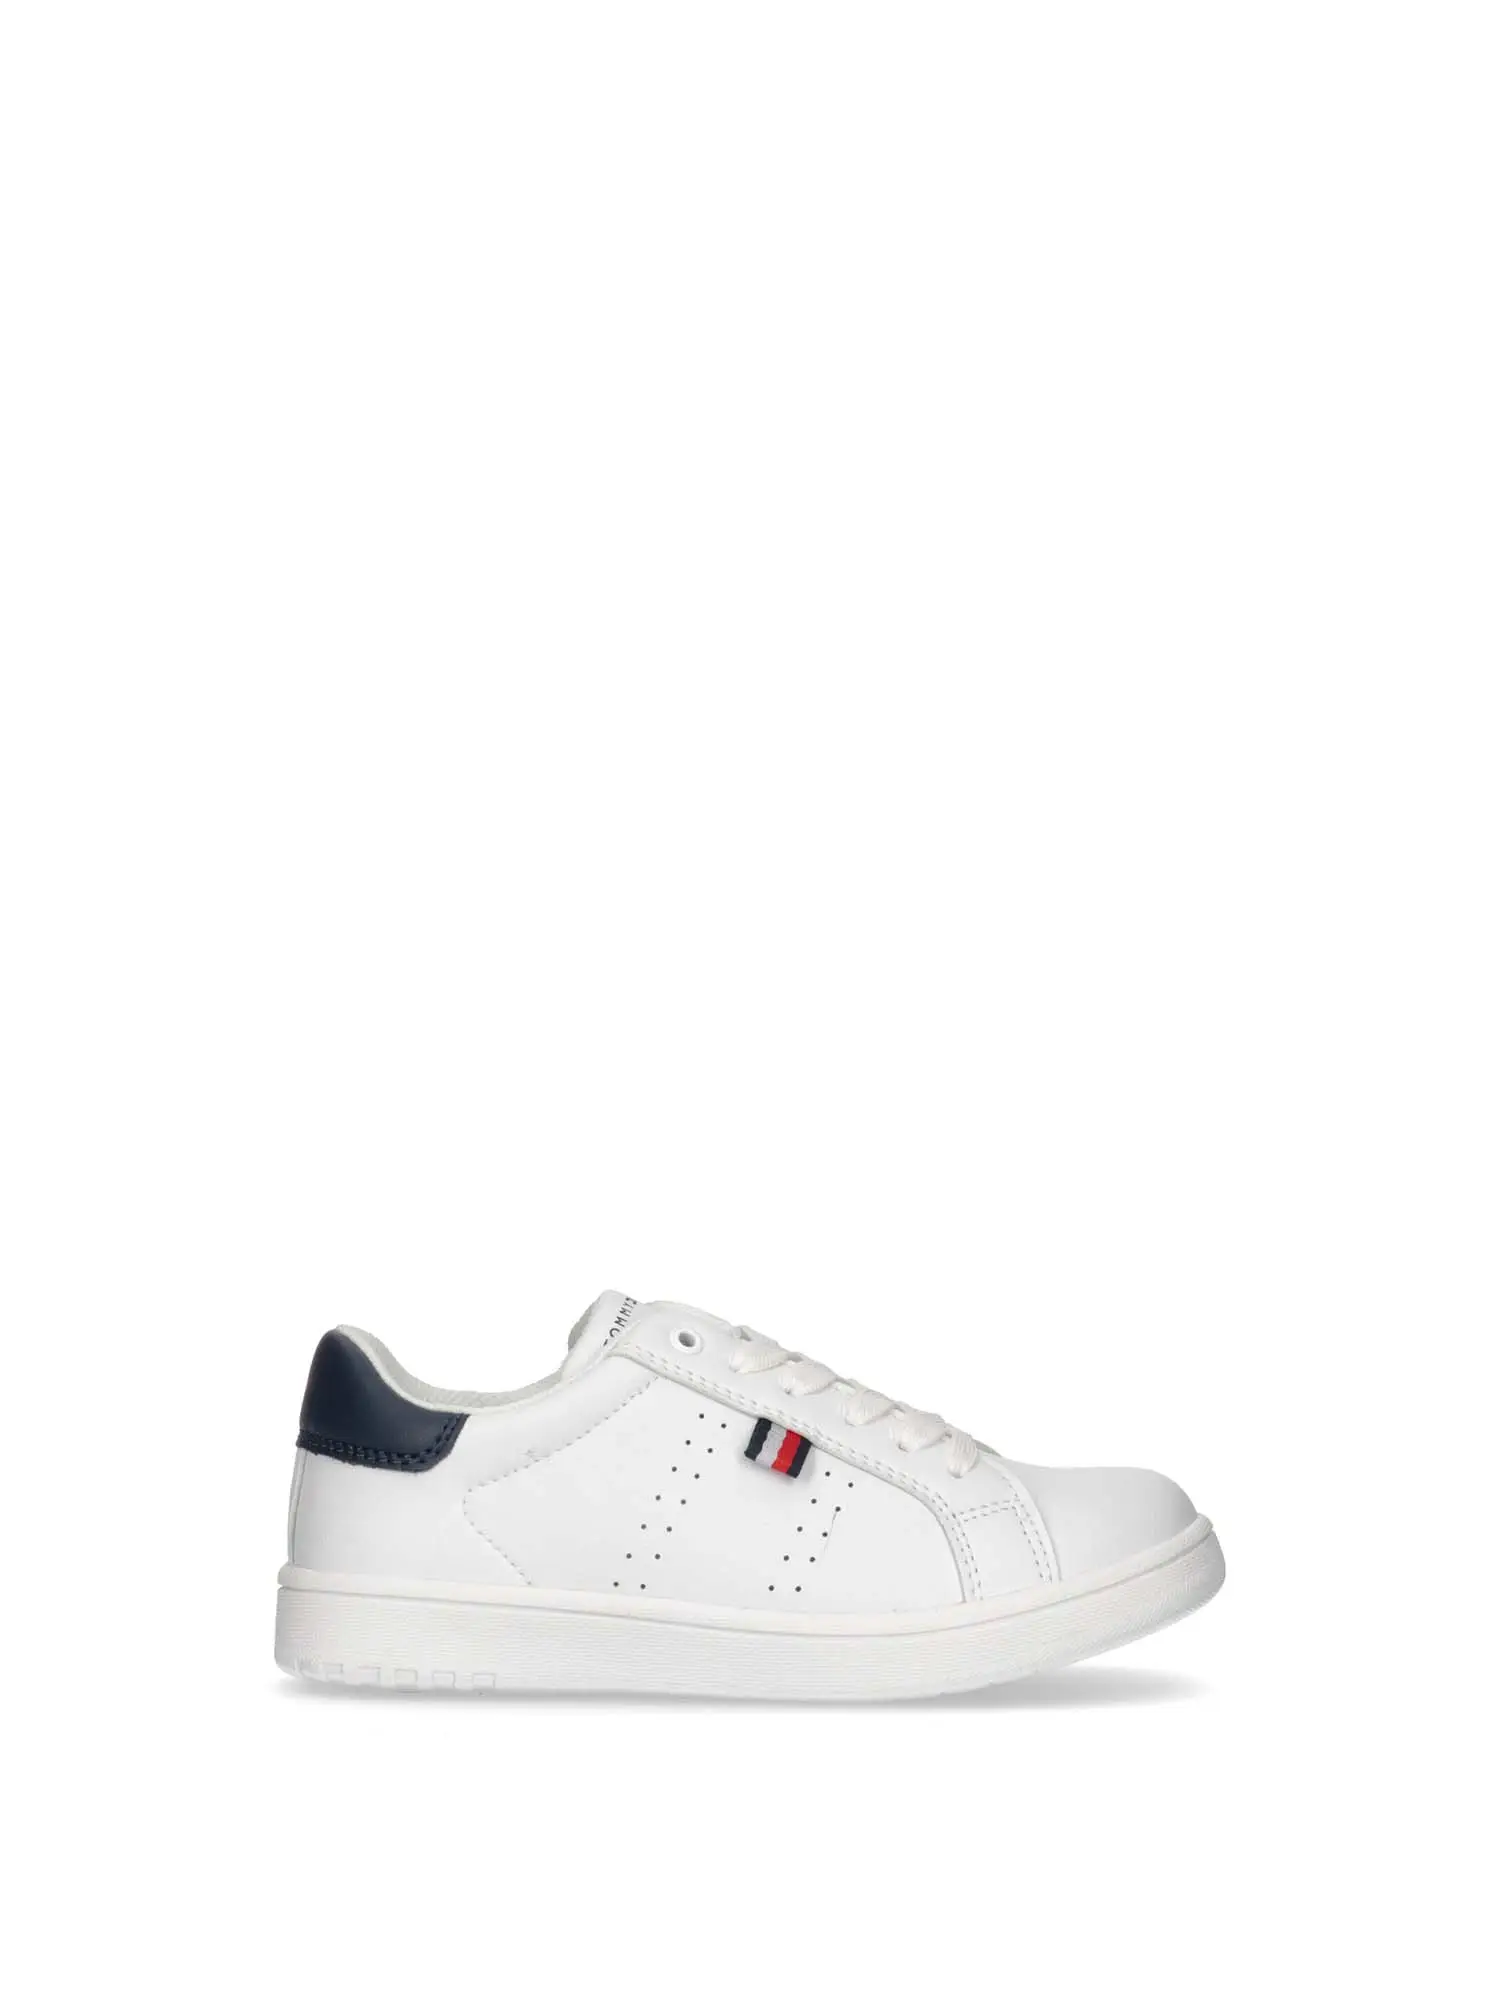 SNEAKERS UNISEX - TOMMY HILFIGER - T3X9-33348-1355 - BIANCO, 36